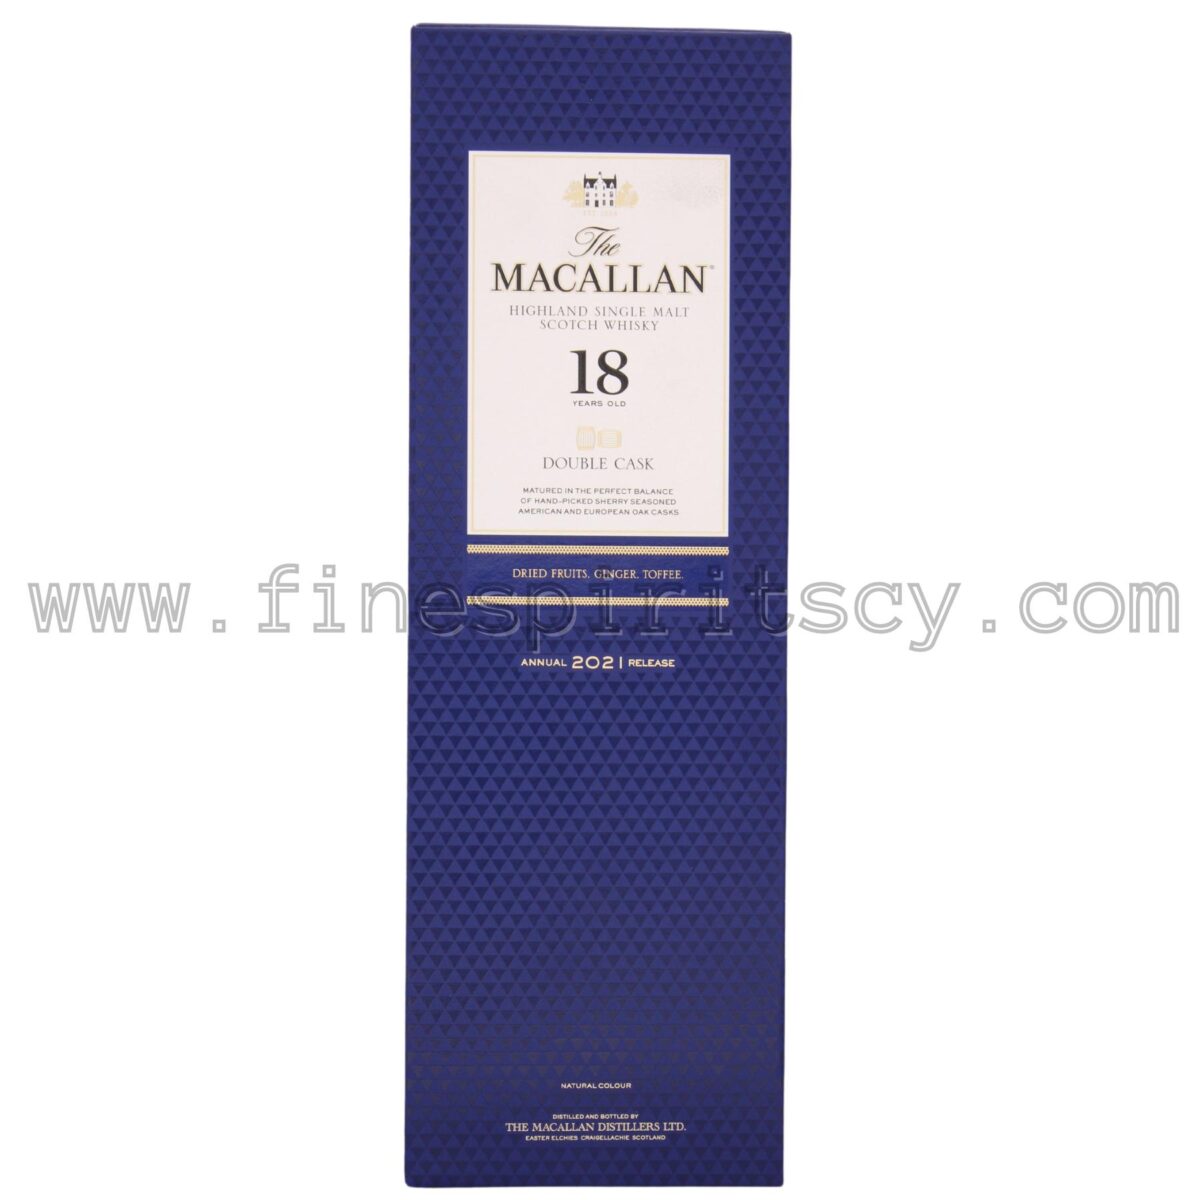 Macallan 18 Year Old Double Cask 2021 Release Price Fine Spirits CY Cyprus